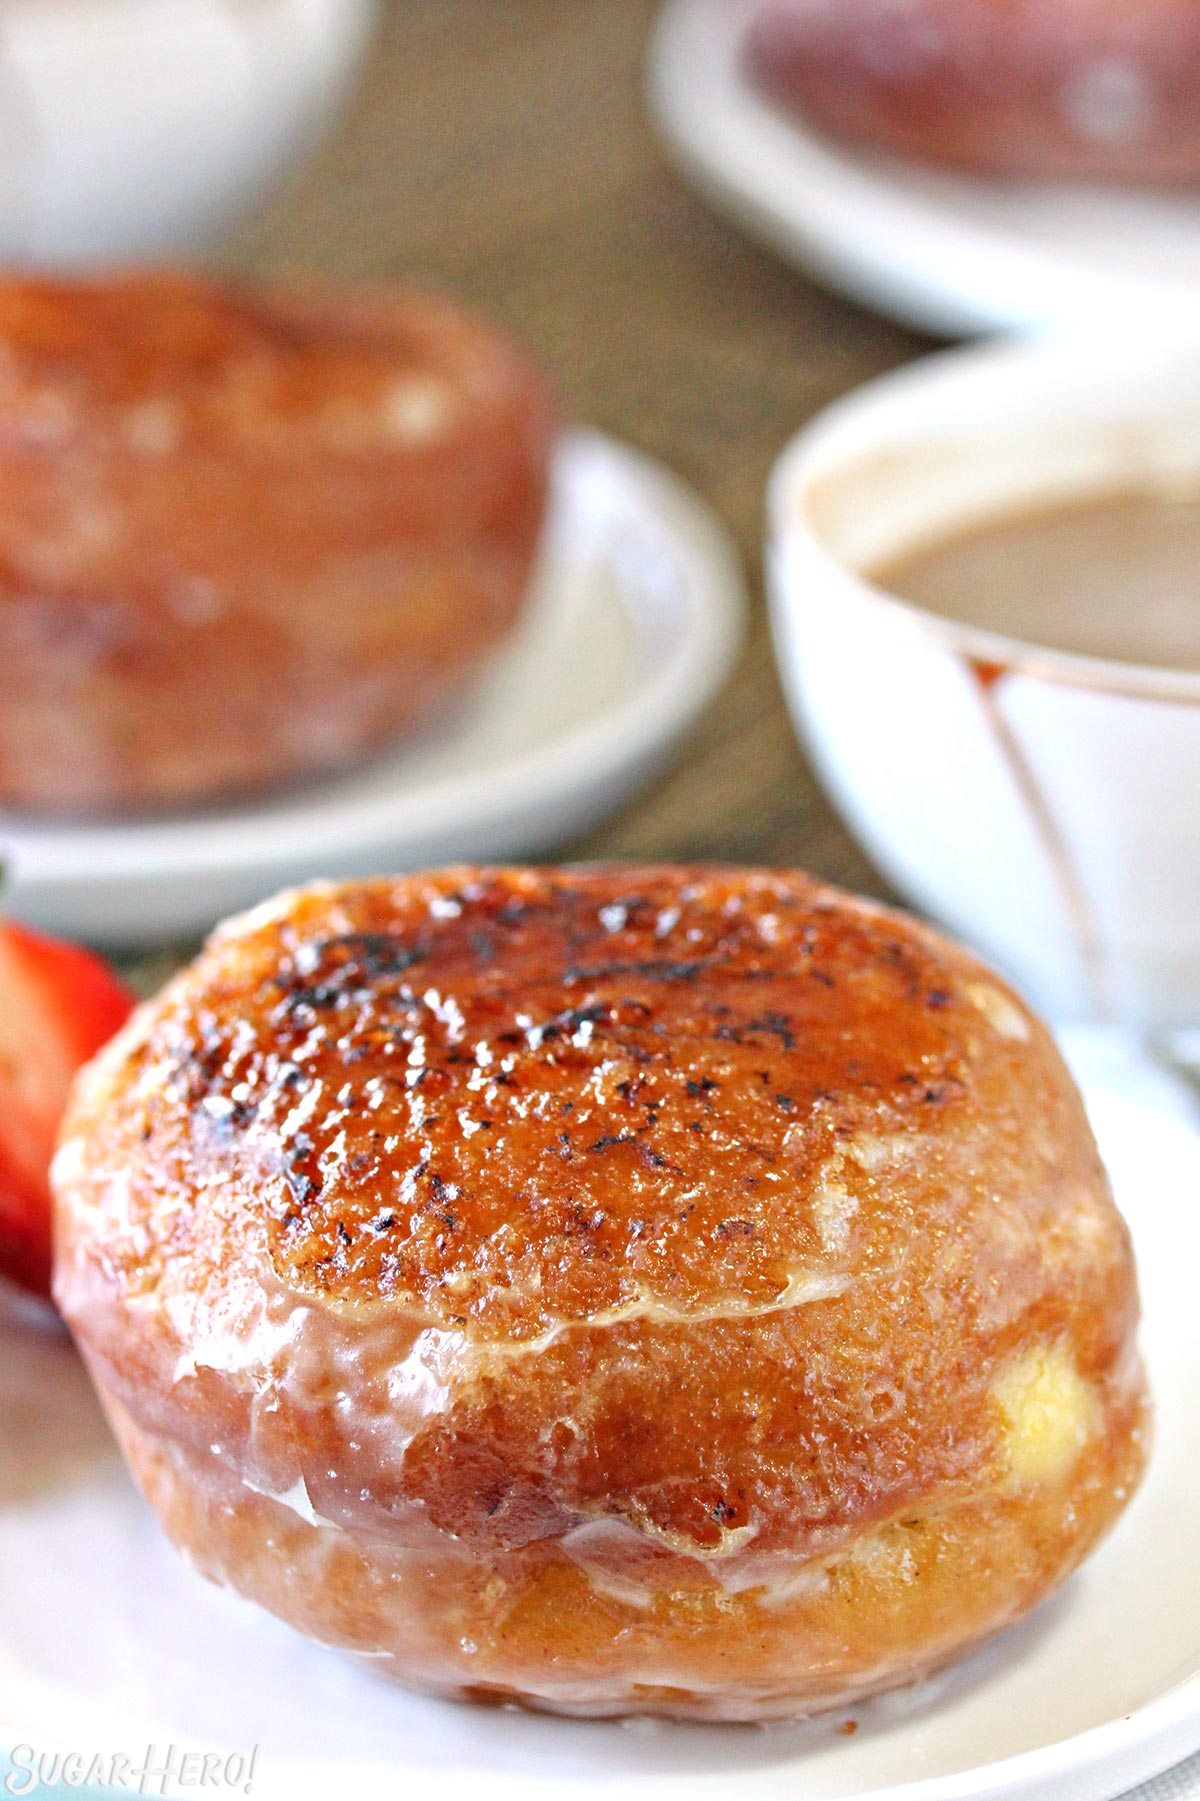 Two Crème Brûlée Donuts on white plates, with shiny caramelized sugar crusts on top.